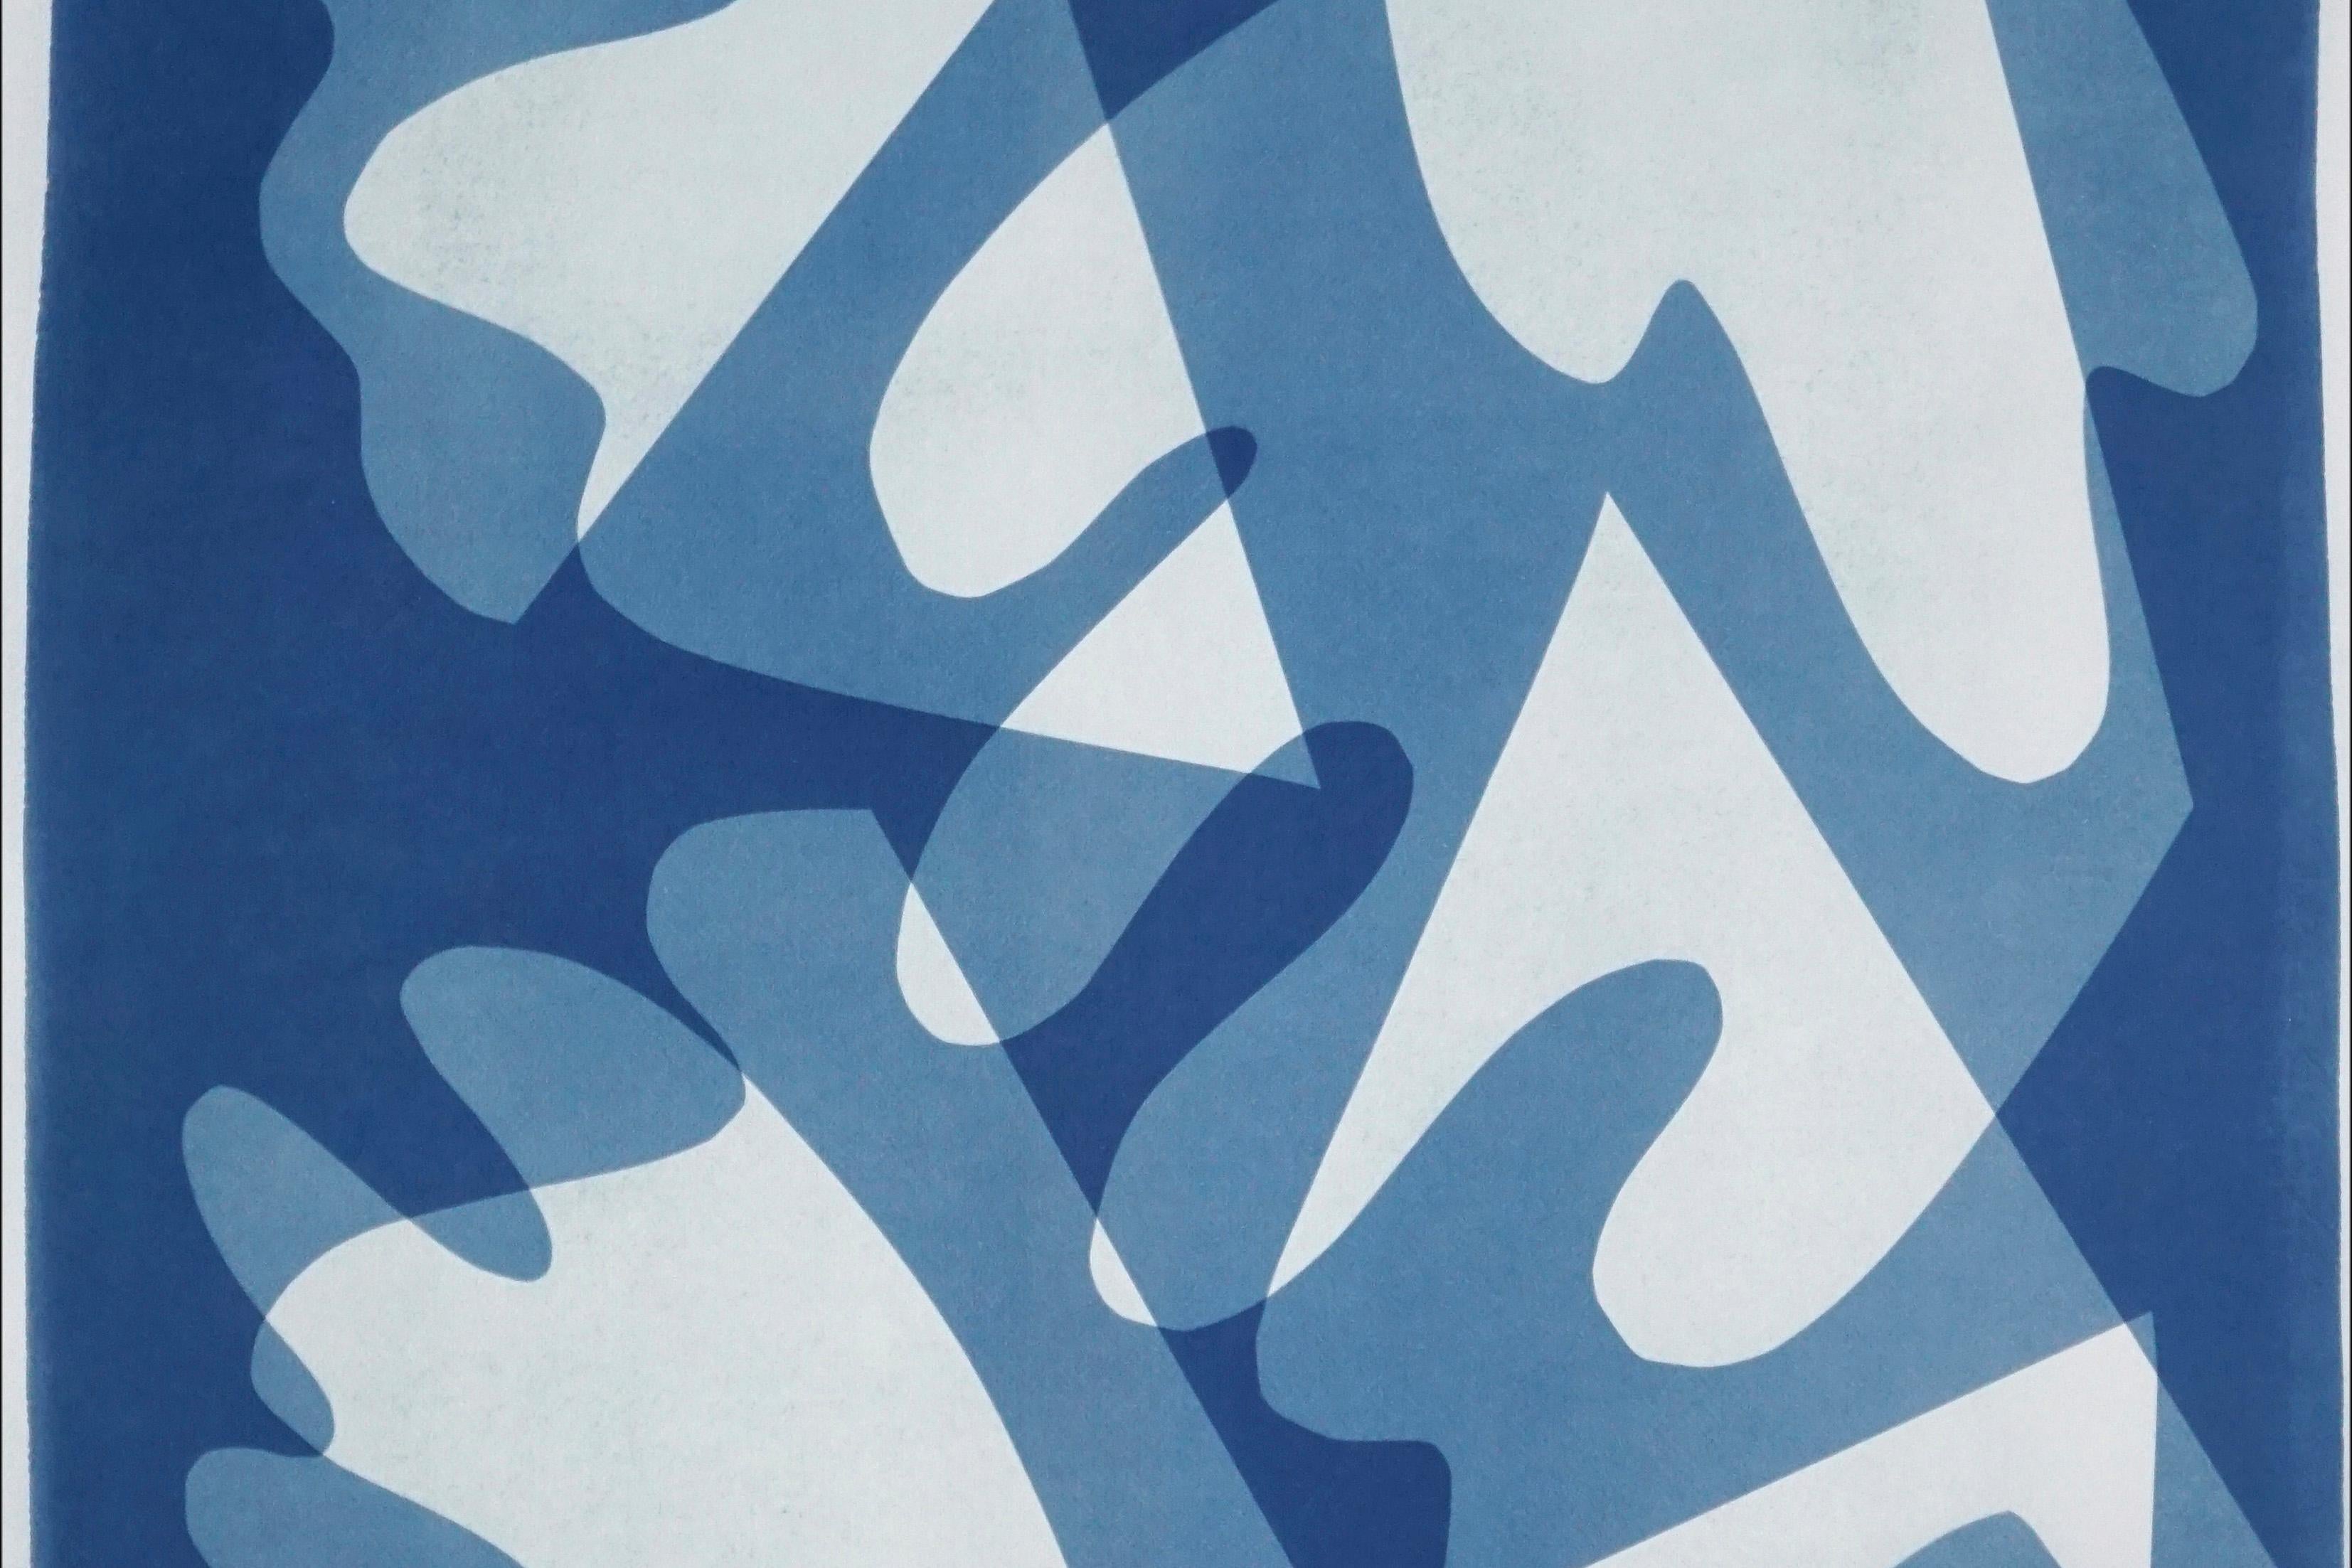 Walking on Glass, Unique Monotype, Cutouts Mid-century Shapes in Blue Tones 2021 For Sale 1